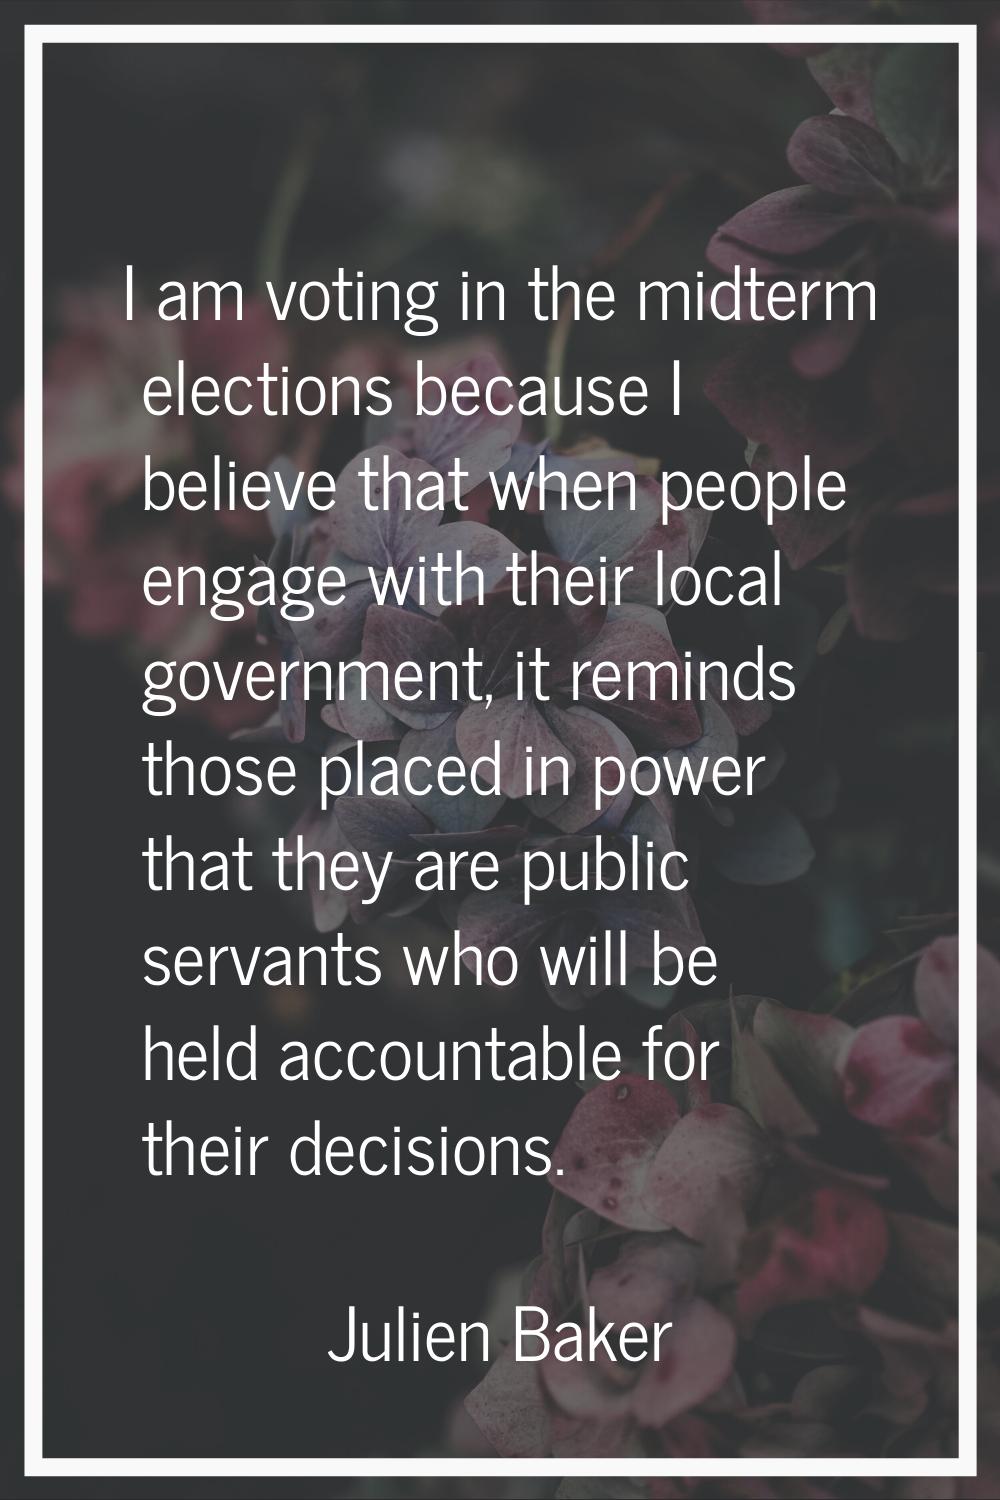 I am voting in the midterm elections because I believe that when people engage with their local gov